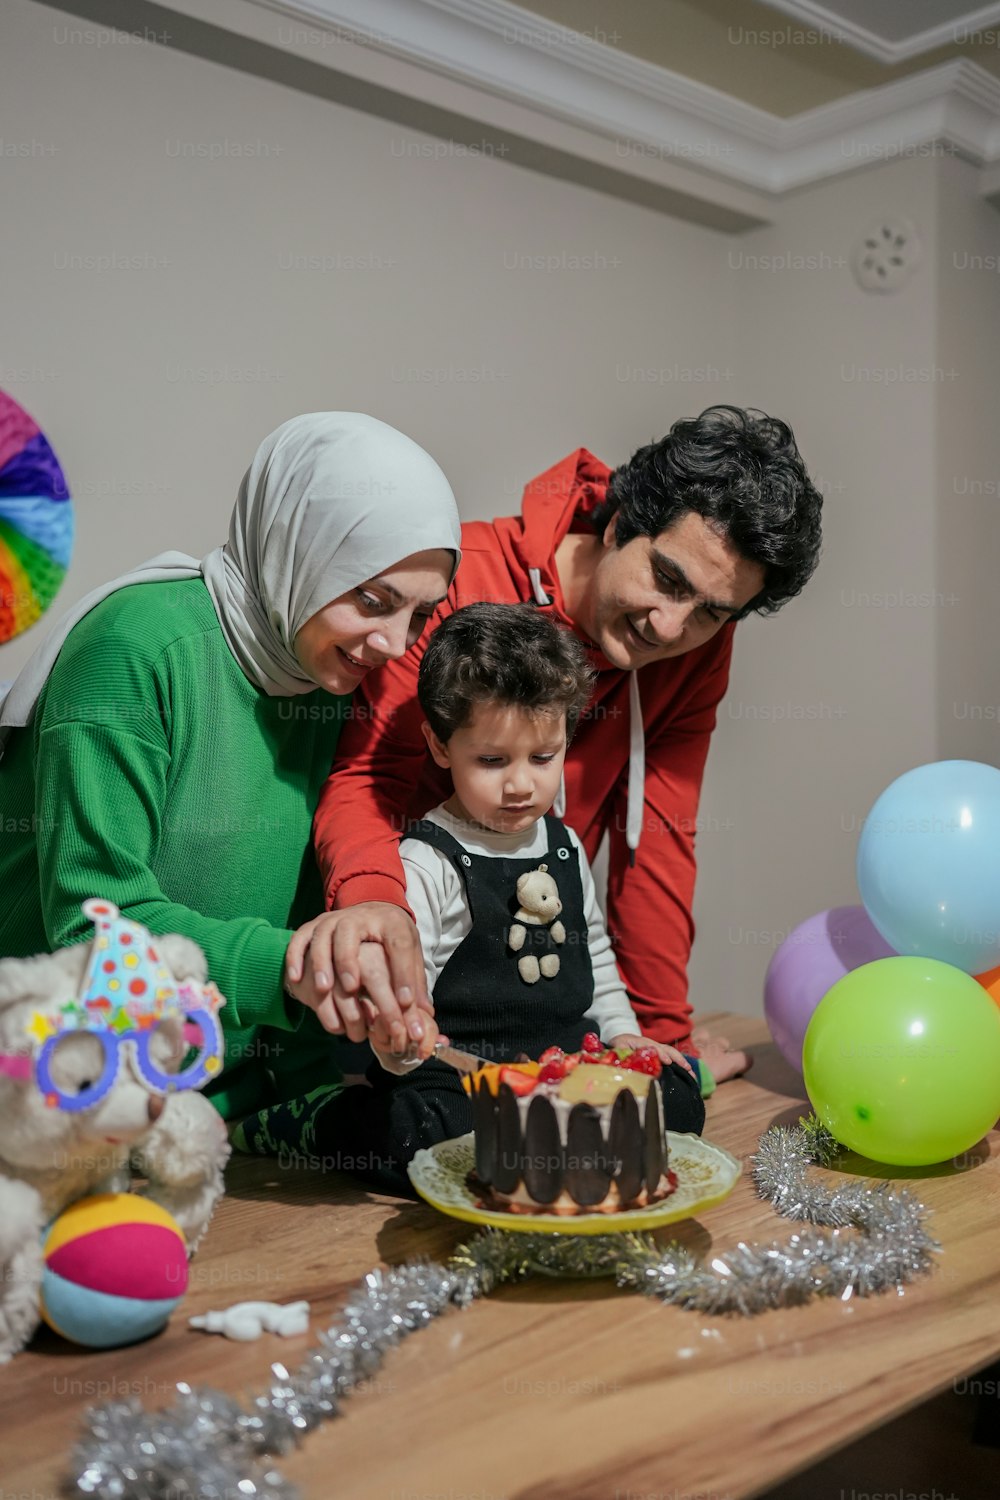 a man and a woman cutting a cake with a child